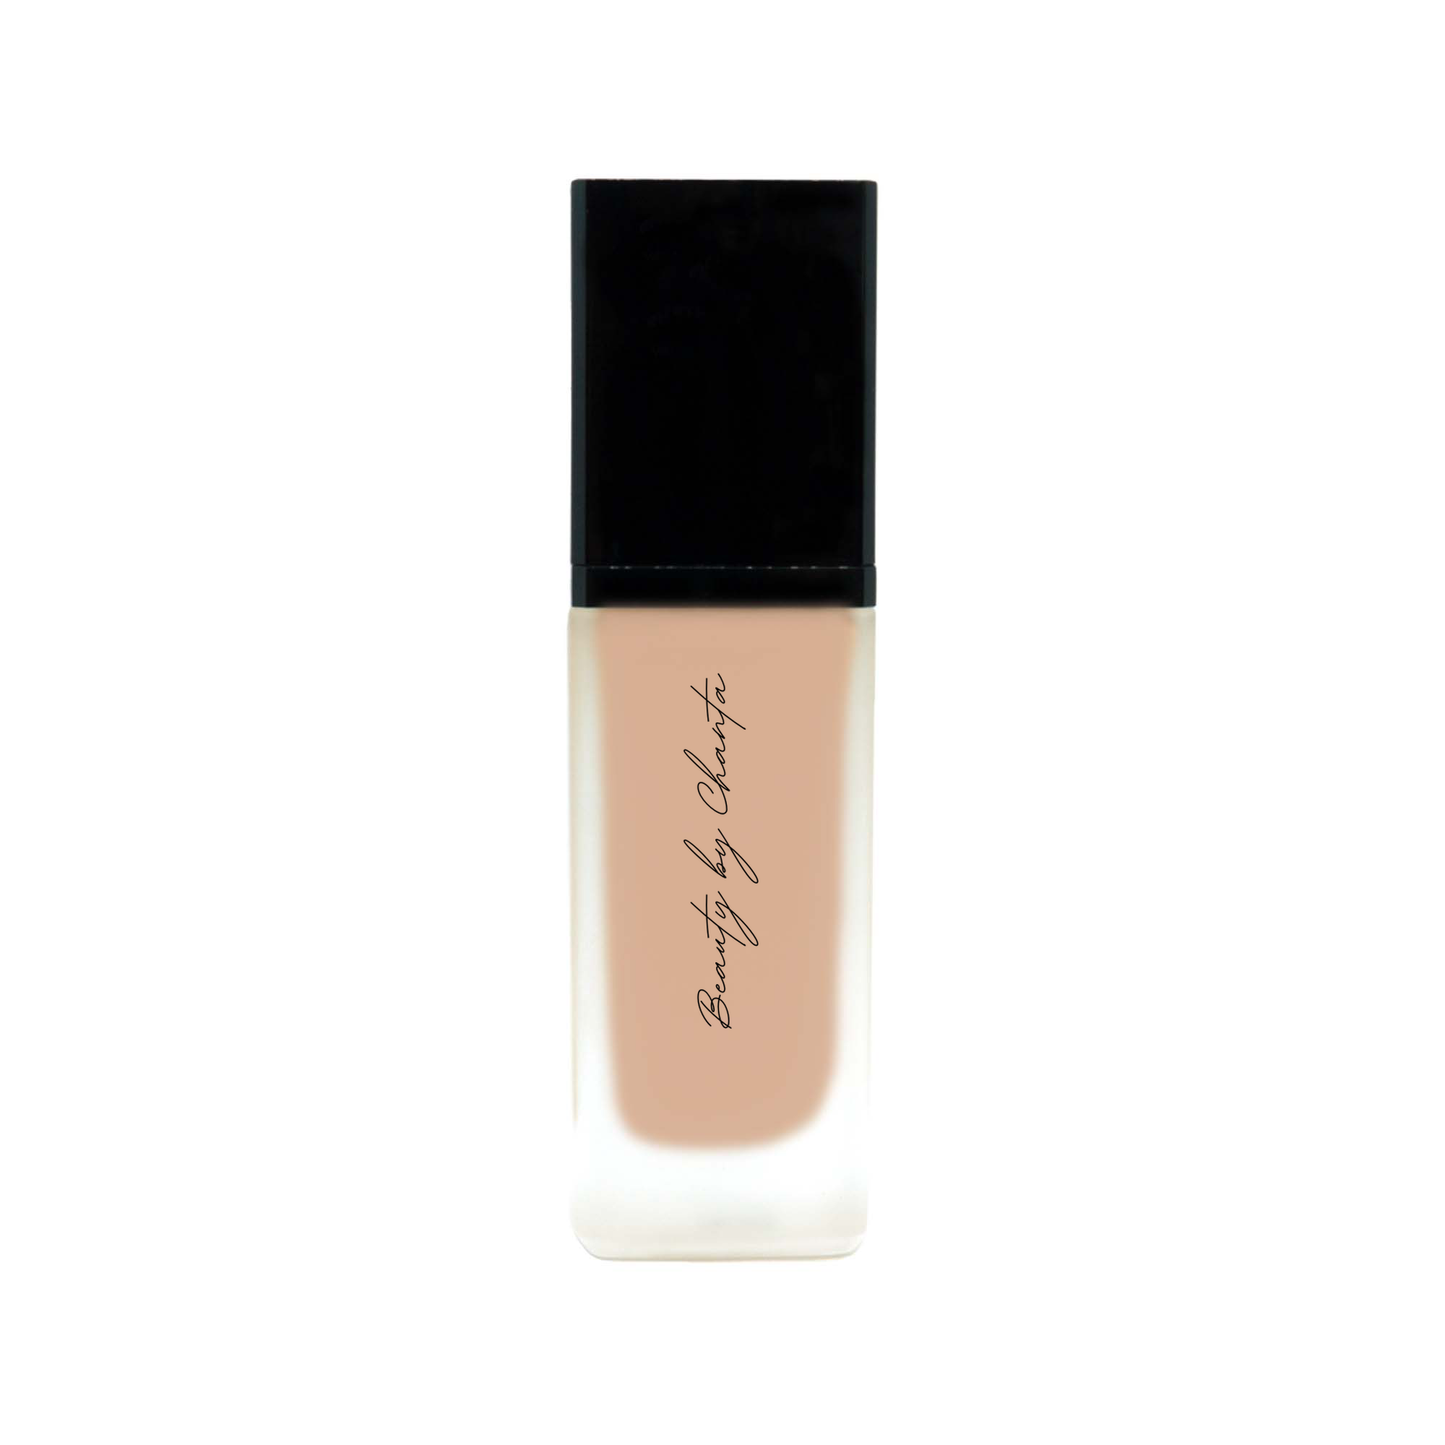 Foundation with SPF - Warm Nude